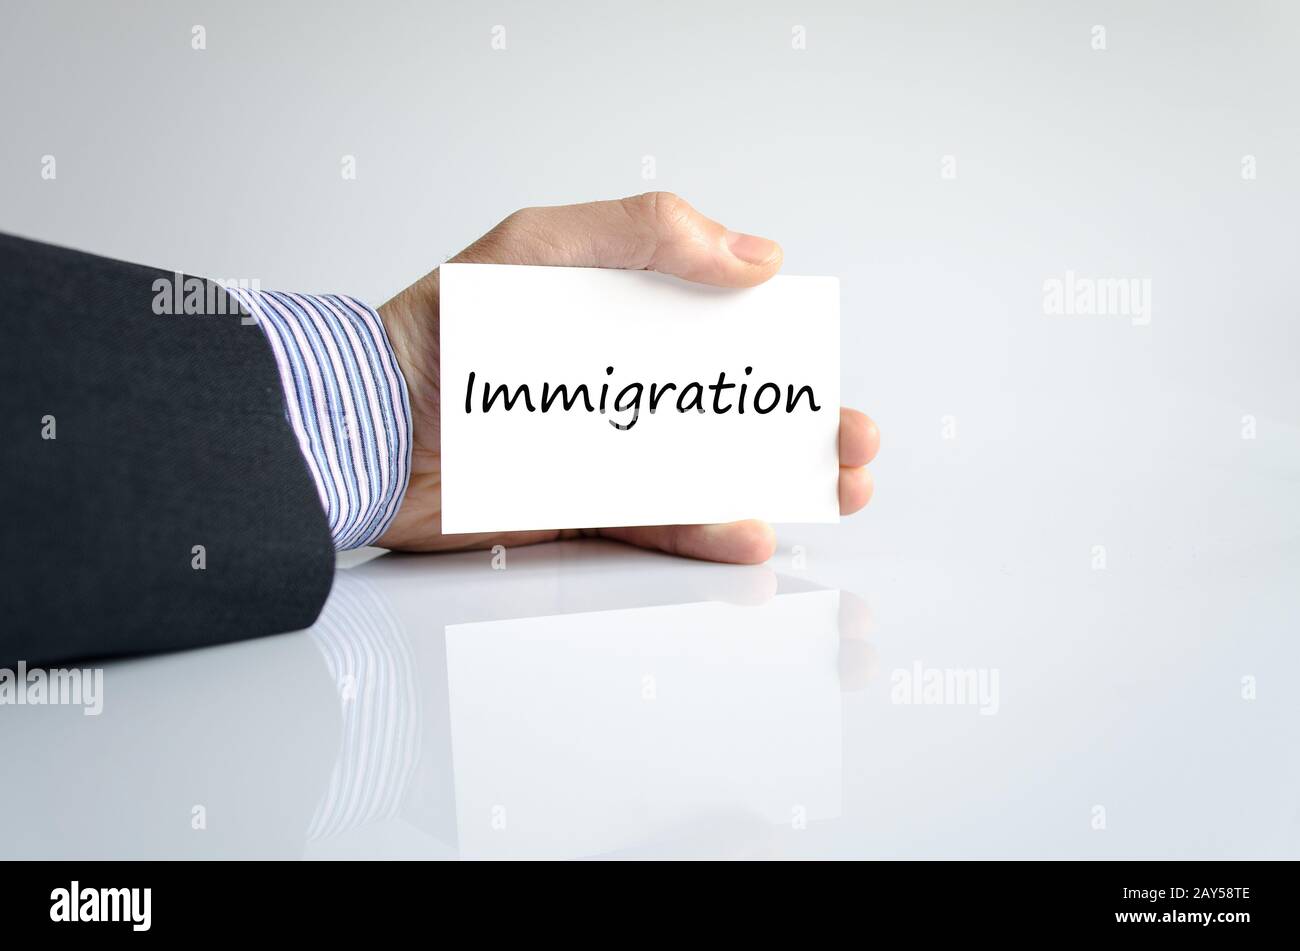 Immigration text concept Stock Photo